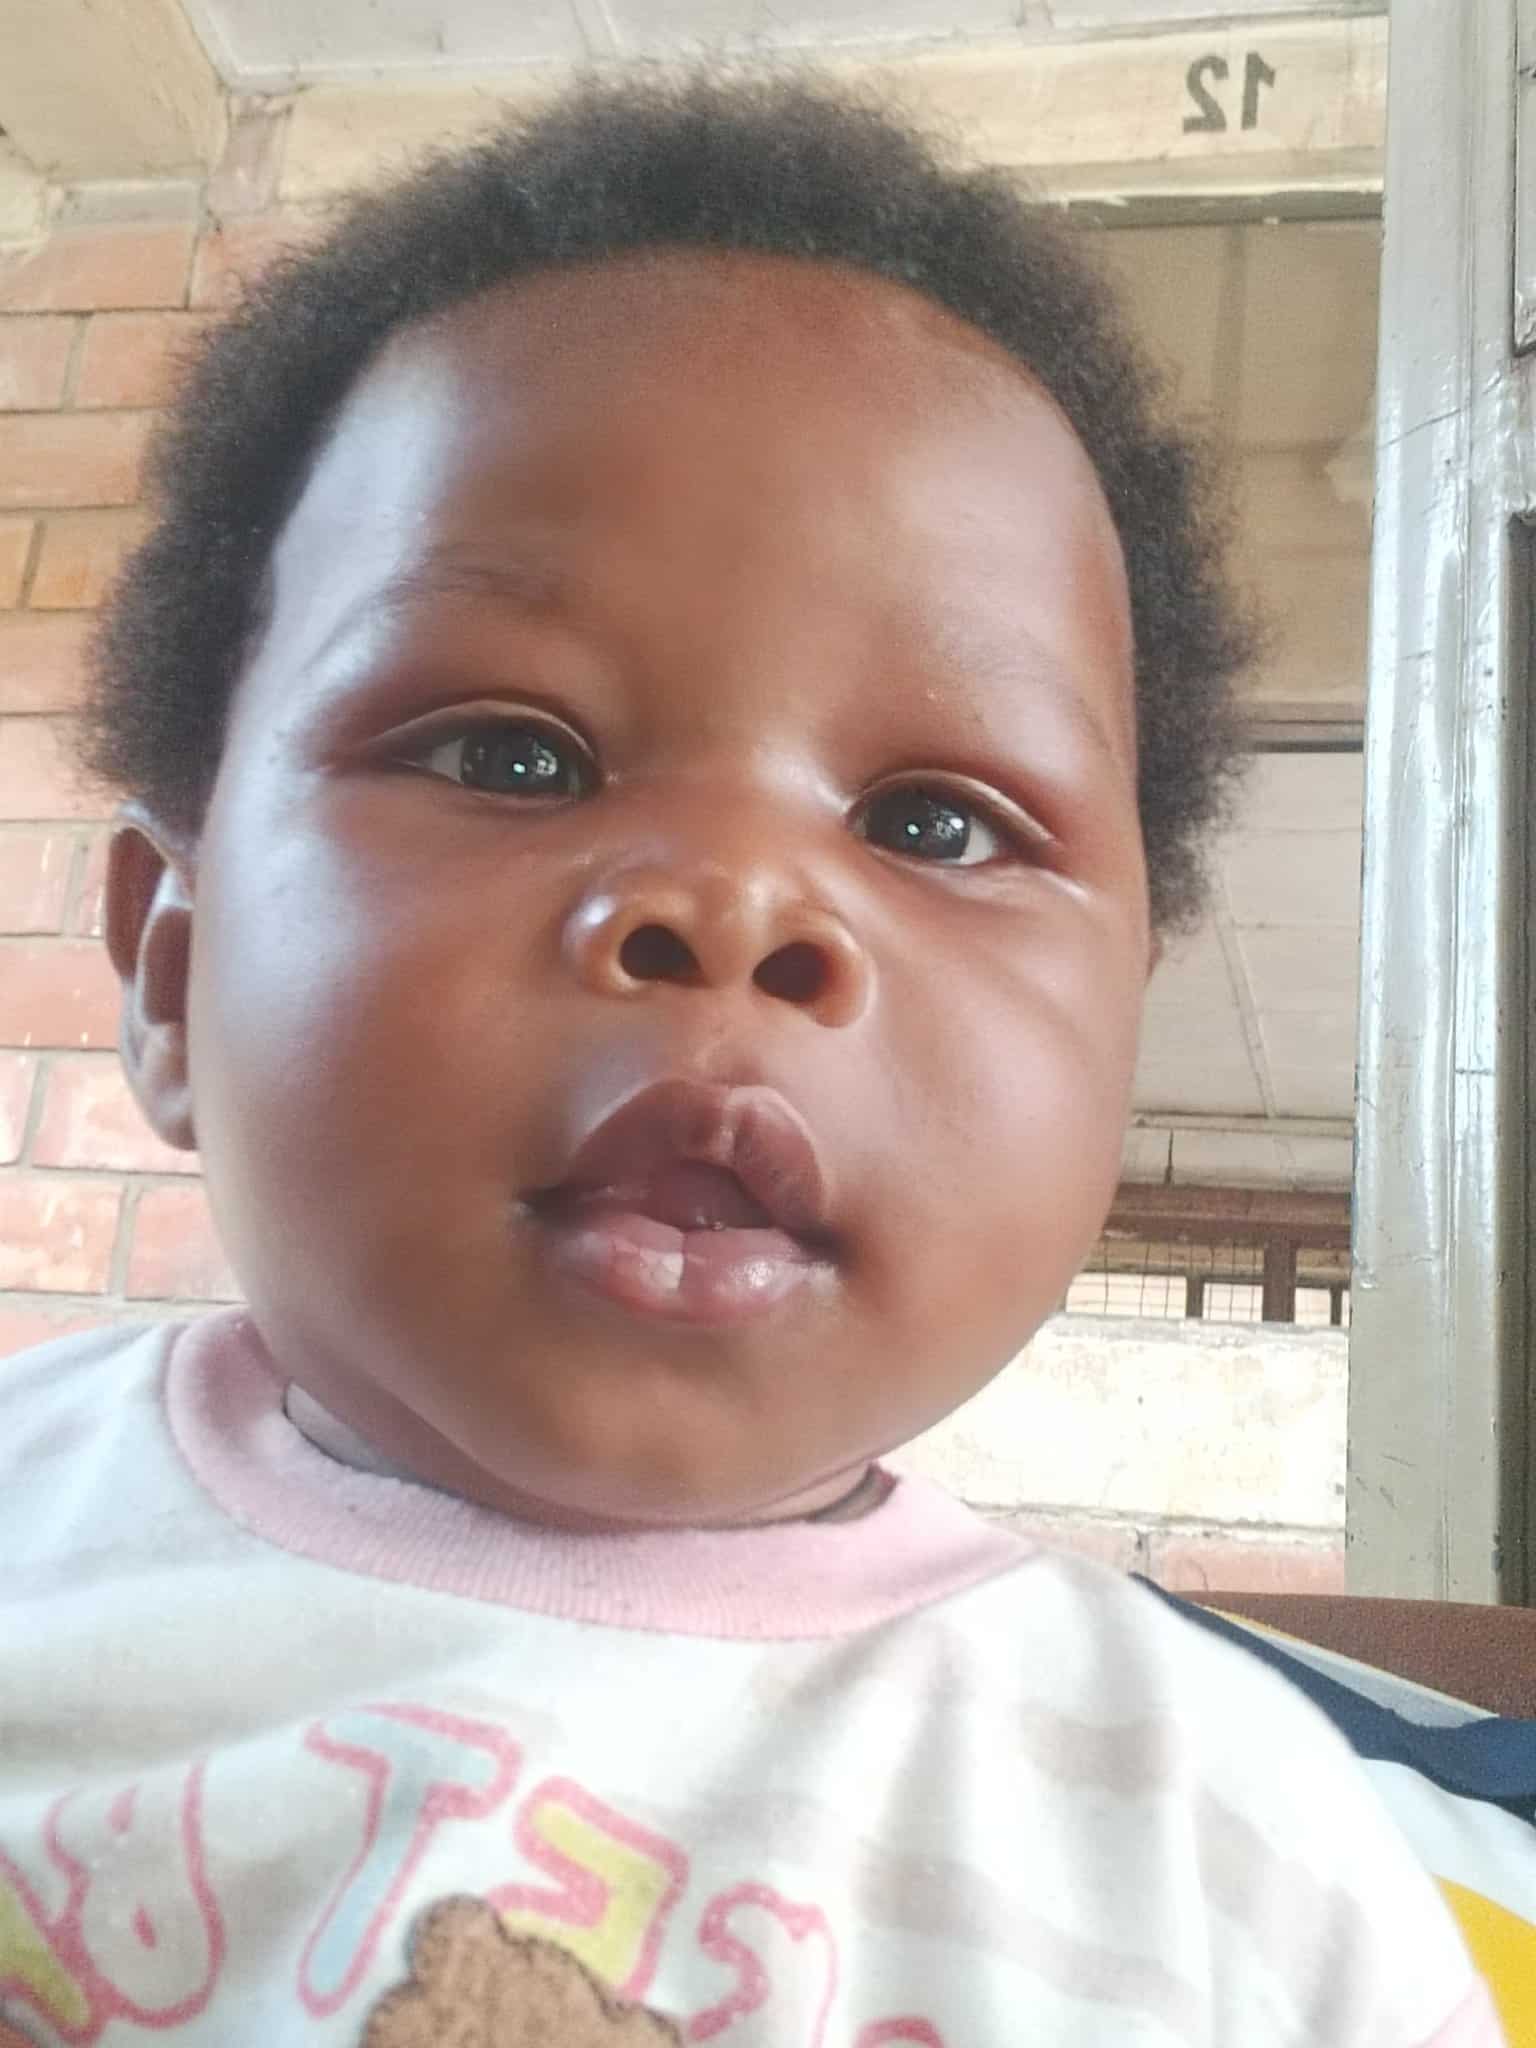 Woman disguises herself and steals 6 months old baby from saloon